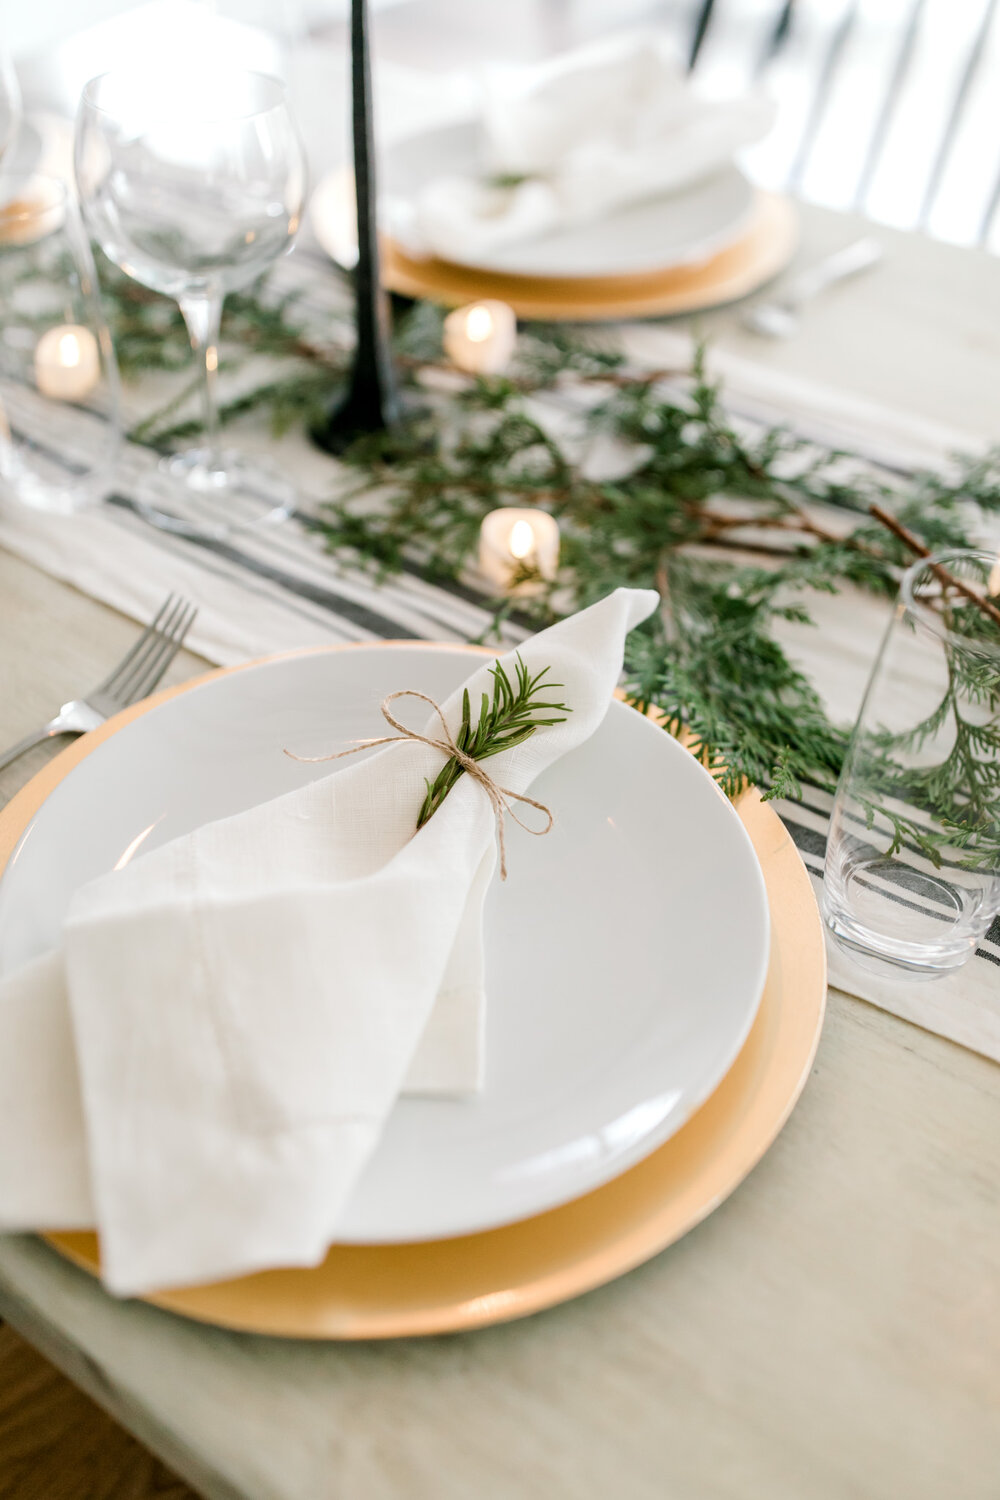 Classic, Earthy Tablescape for the Holiday &amp; Every Day | Place Settings | Elegant Table Design | 